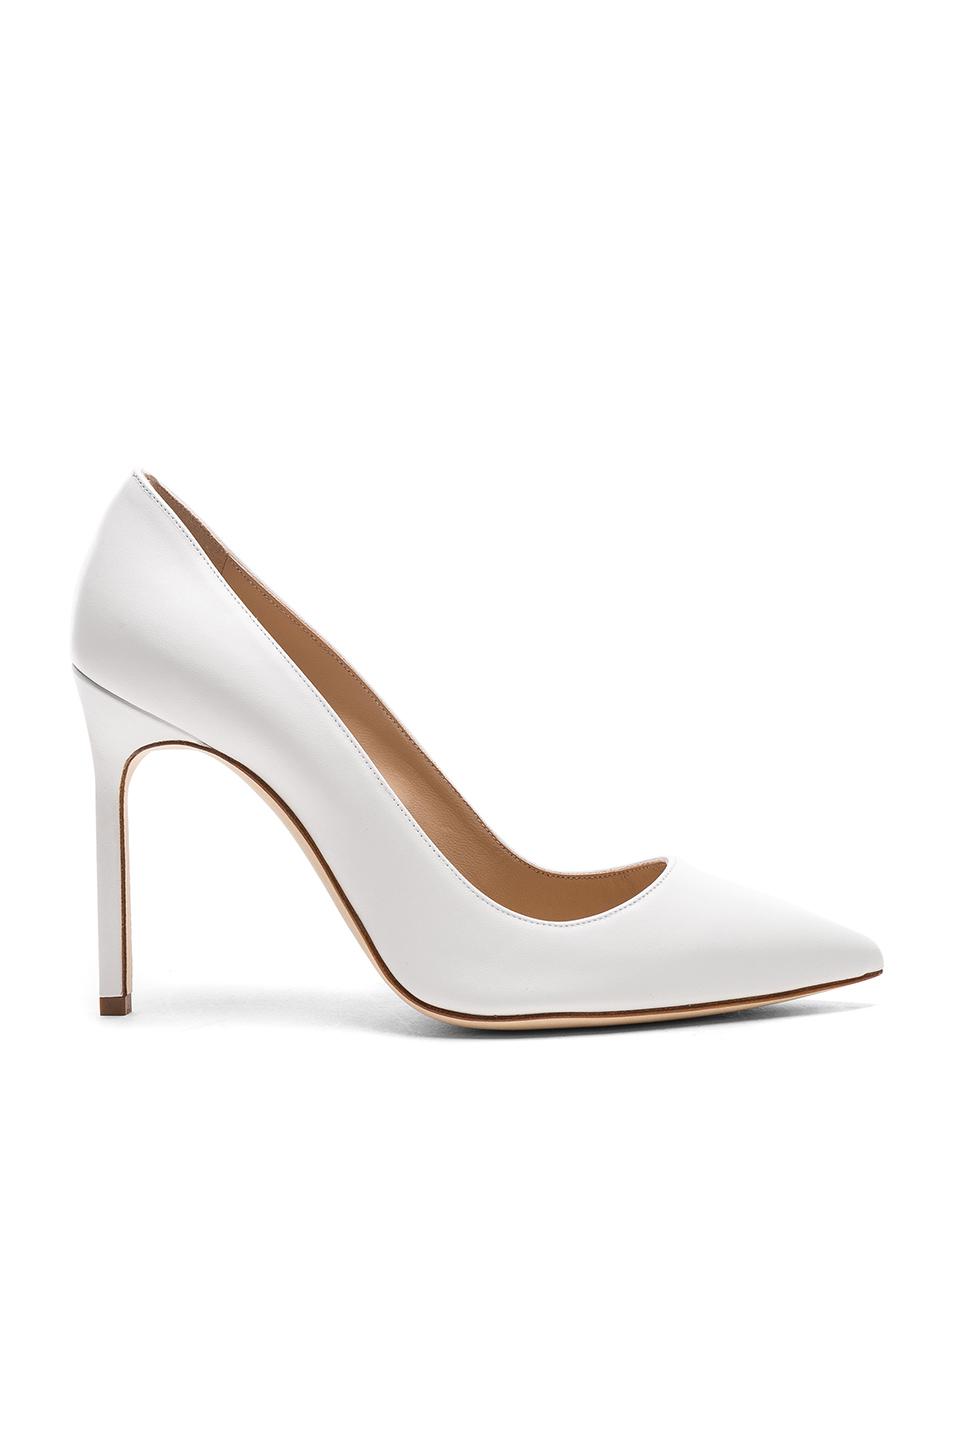 Manolo Blahnik Leather Bb 105 Heels in White Leather (White) - Lyst